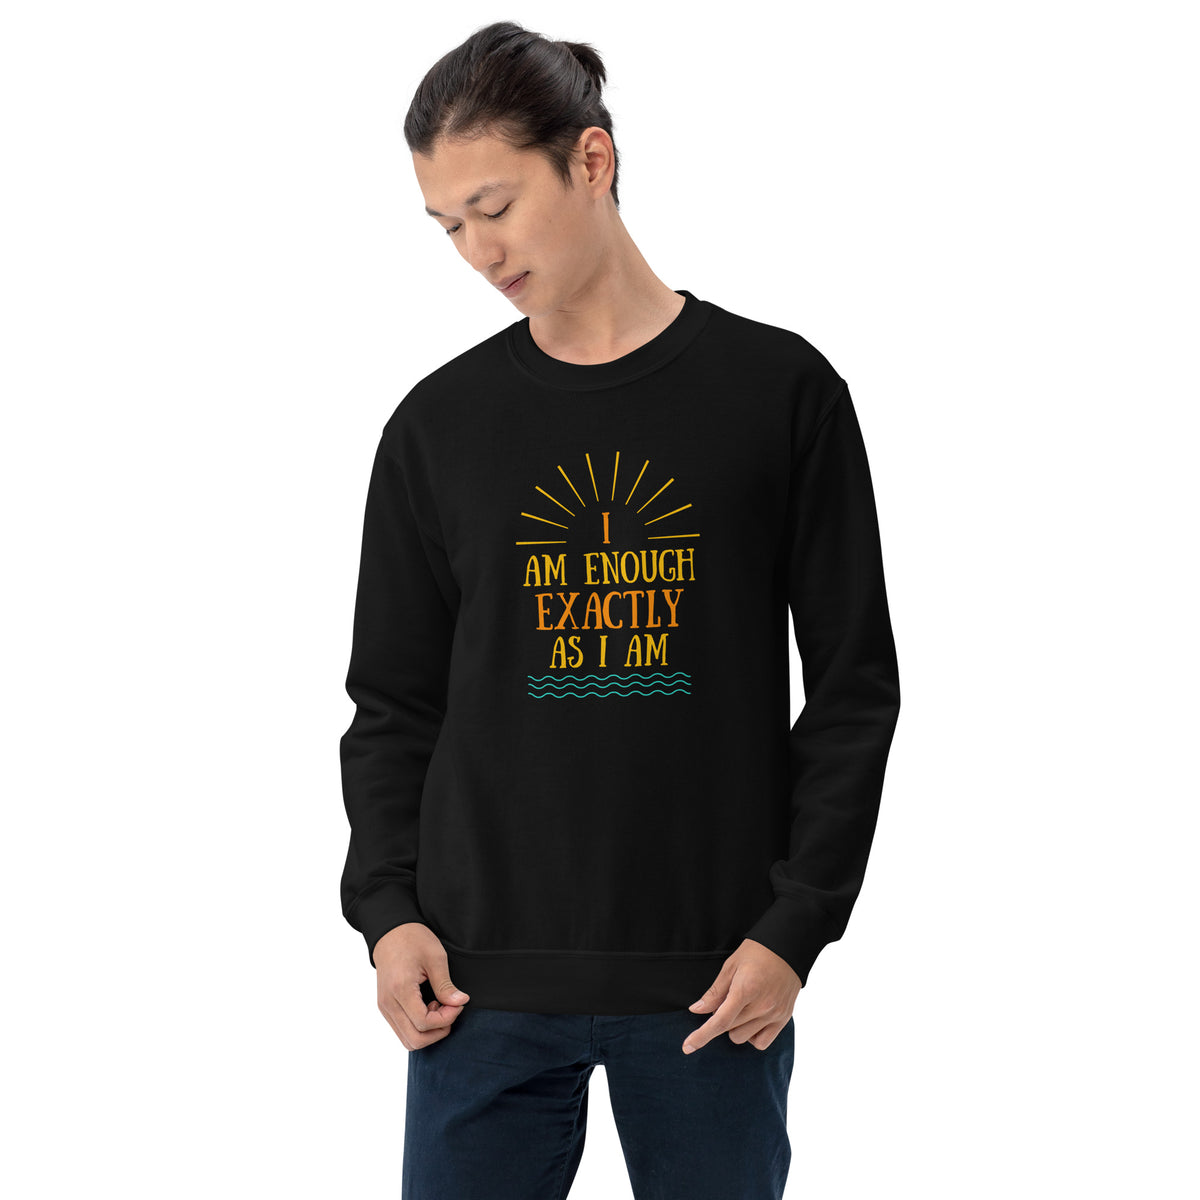 I AM ENOUGH EXACTLY AS I AM - Vintage Inspirational Sweatshirt for Men | I Am Enough Collection